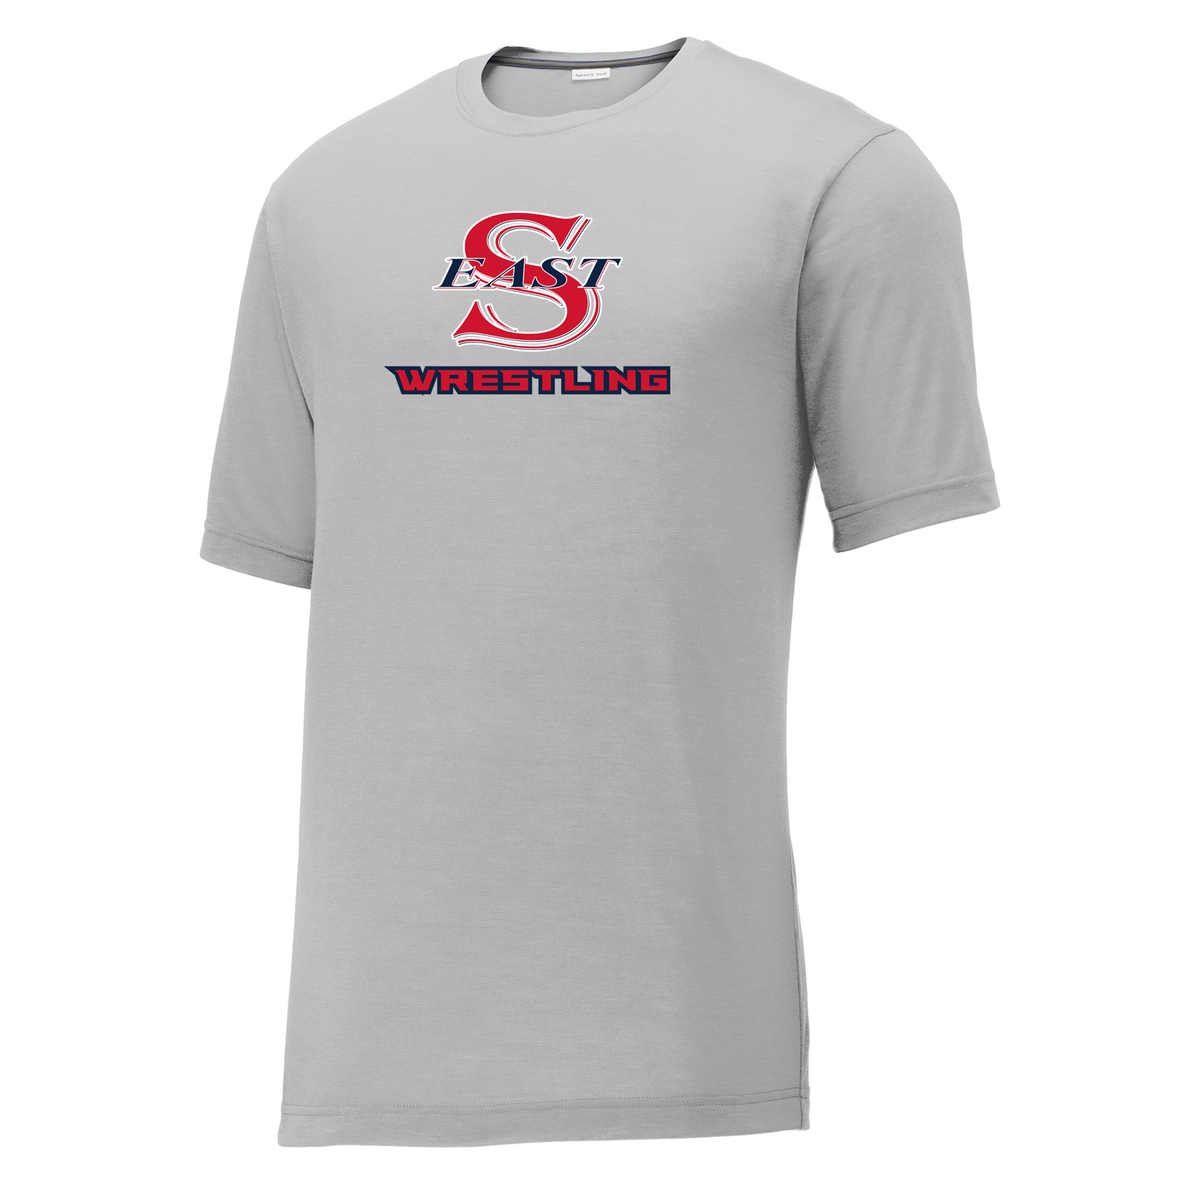 Smithtown East Wrestling CottonTouch Performance T-Shirt